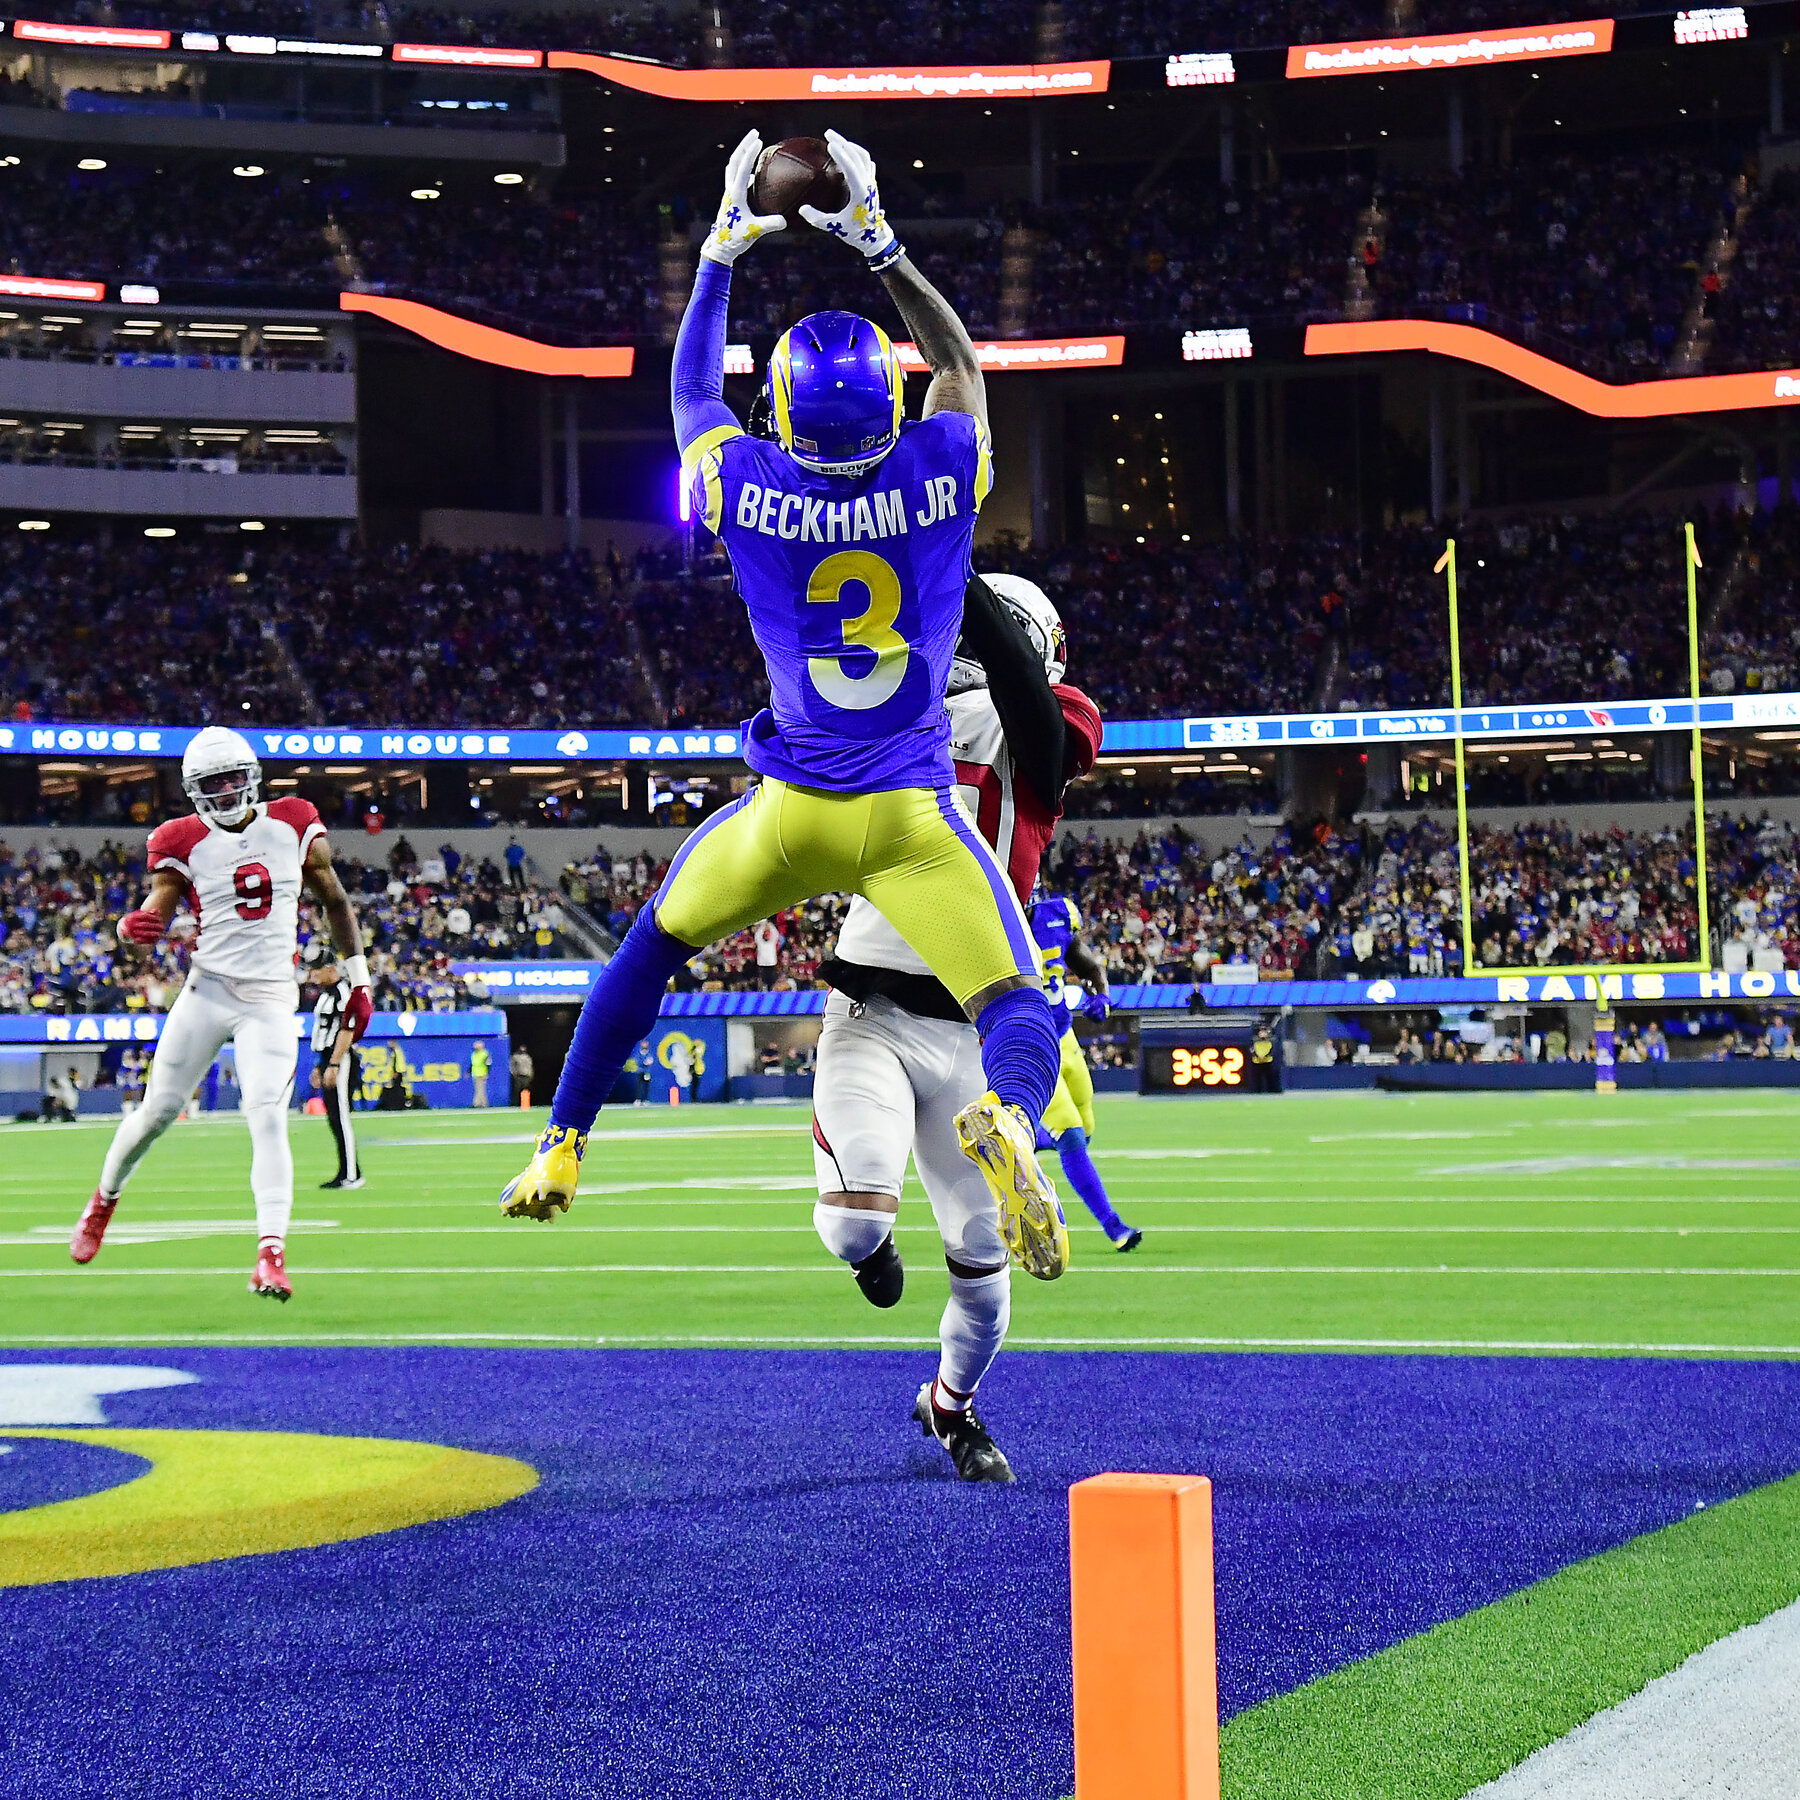 Matthew Stafford and Odell Beckham Lead Rams Over Cardinals